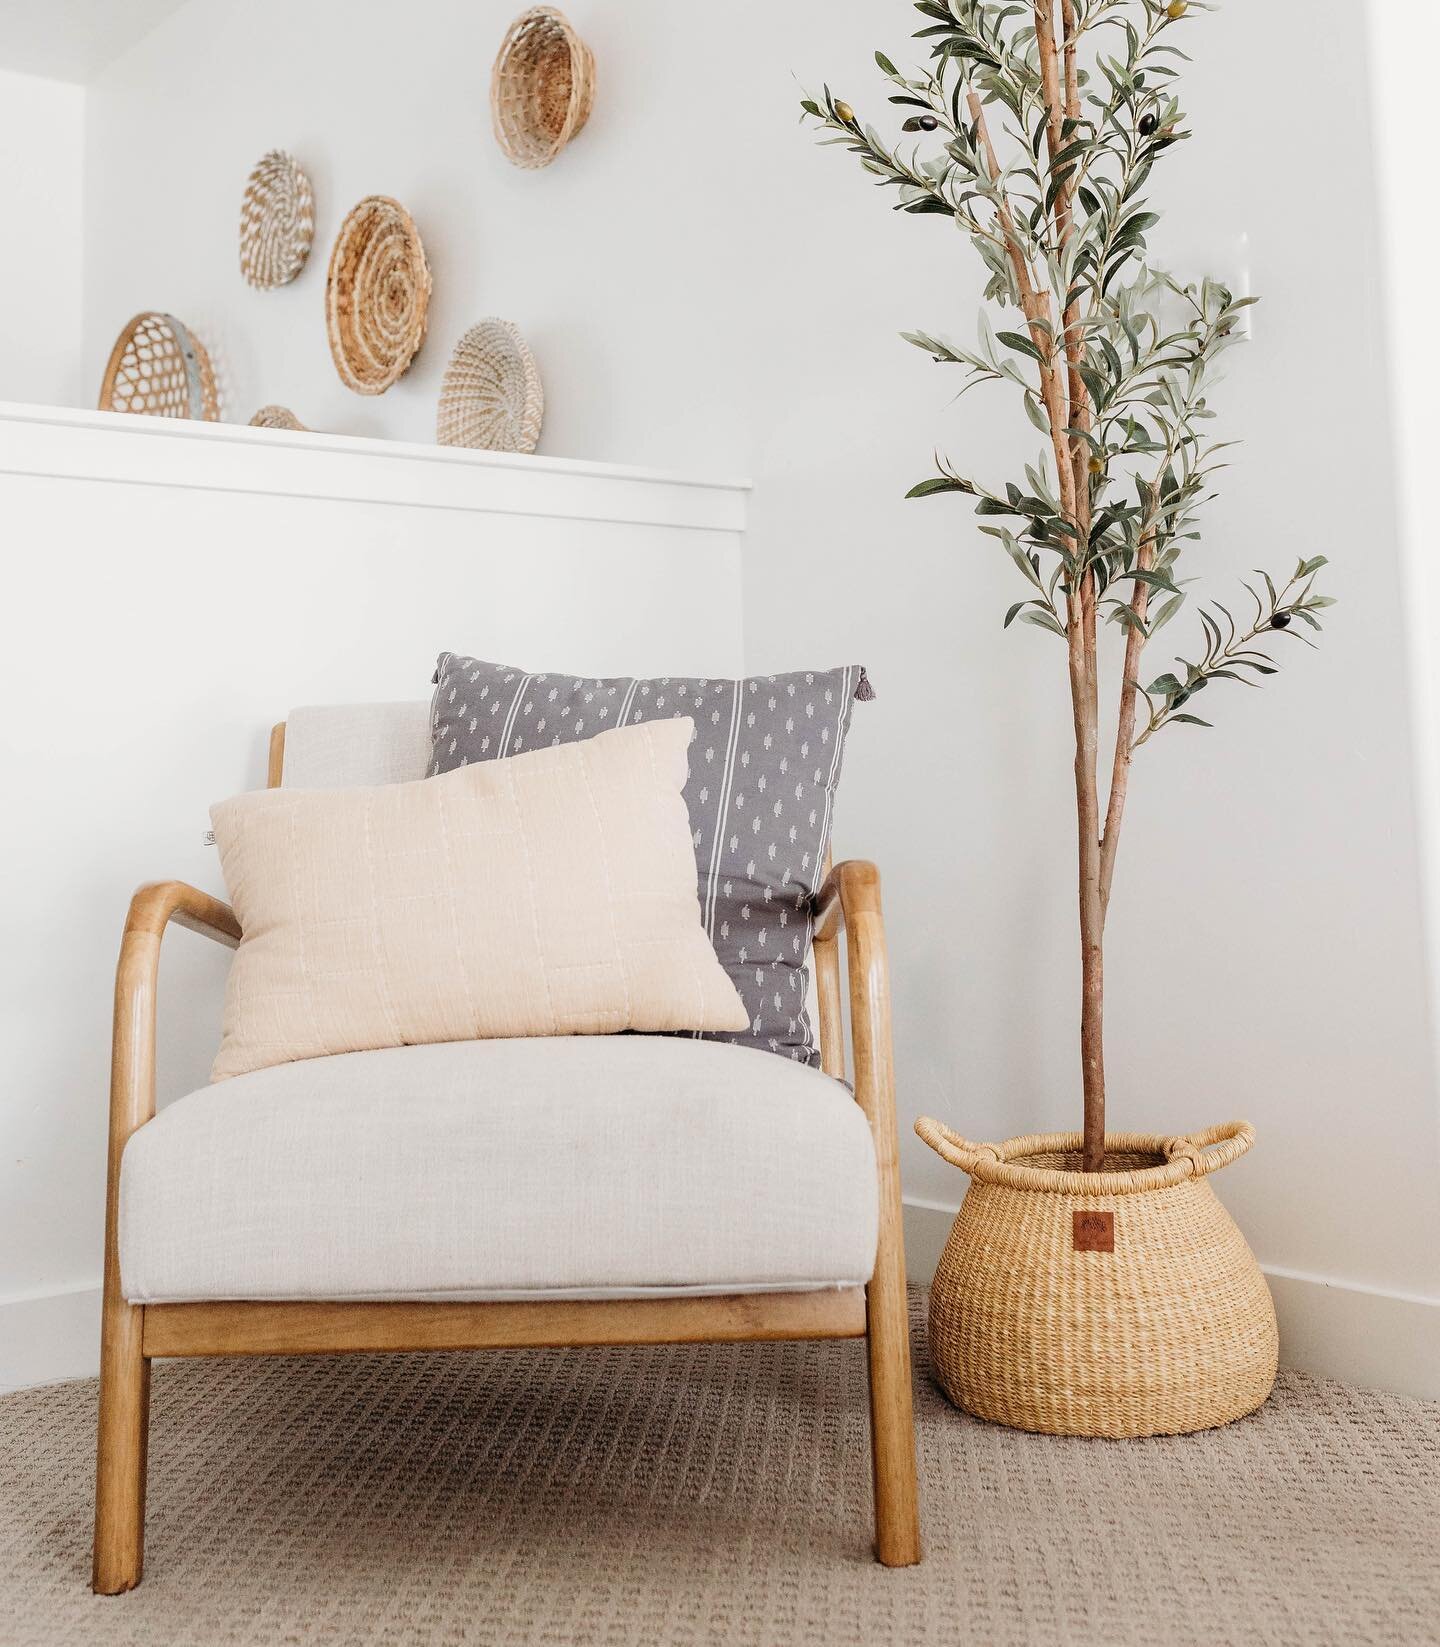 Our Nella Natural basket isn&rsquo;t only for storing small items. It is also great styled as a planter pot. #wovenroots#wovenrootsco#homedecor#baskets#handmade